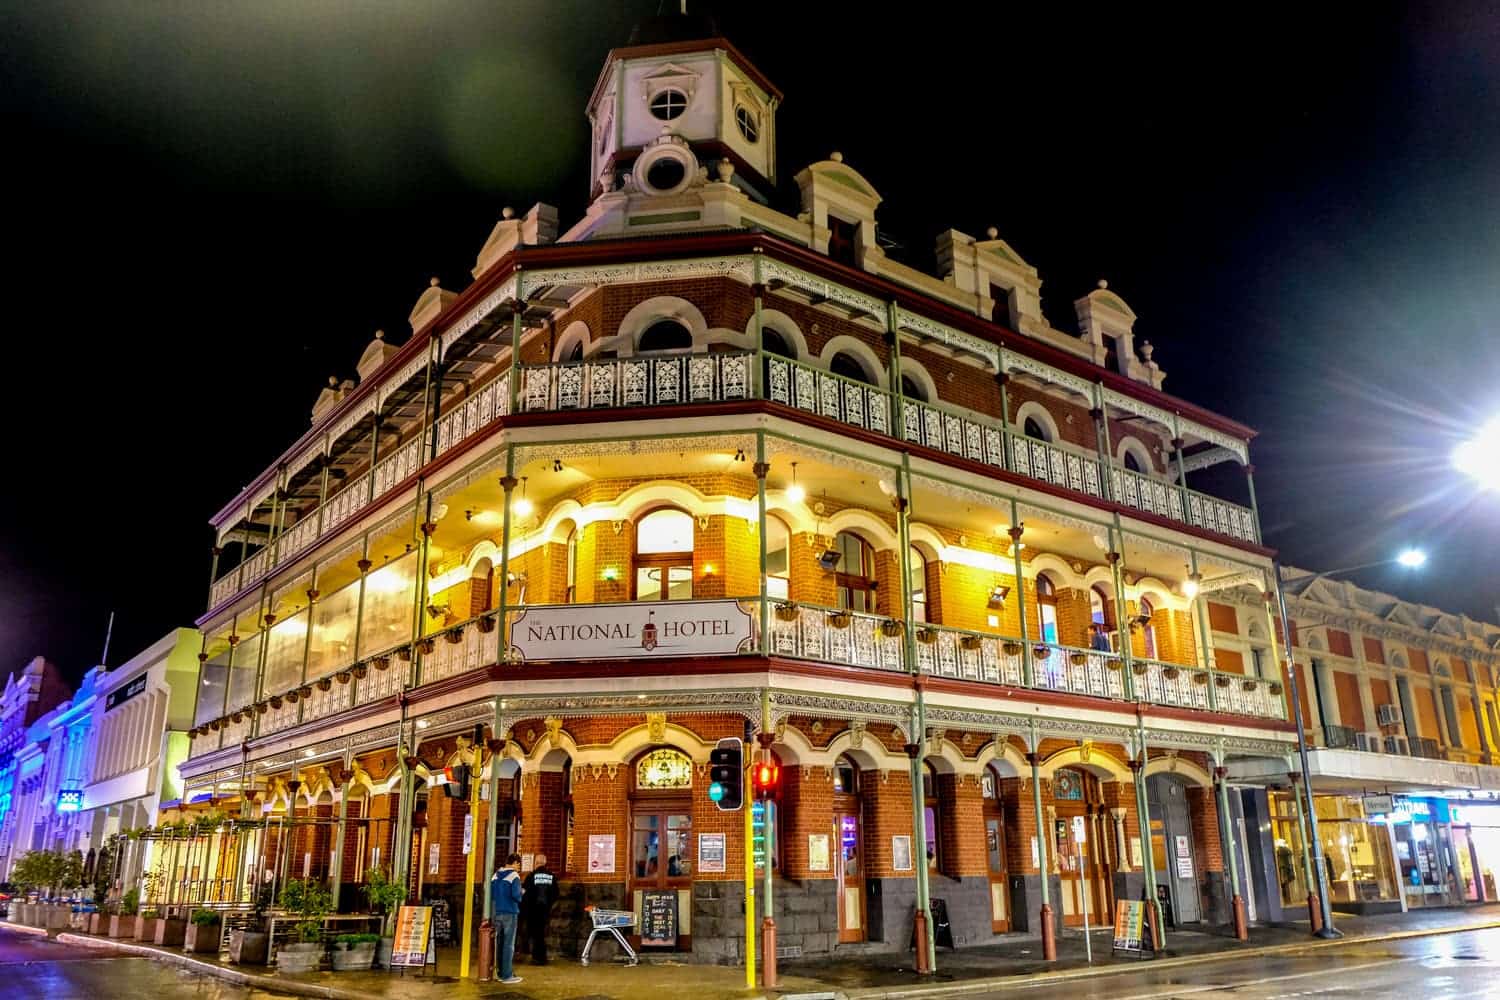 The red brick window archways and white trim of the National hotel in Perth at night - the city's oldest hotel